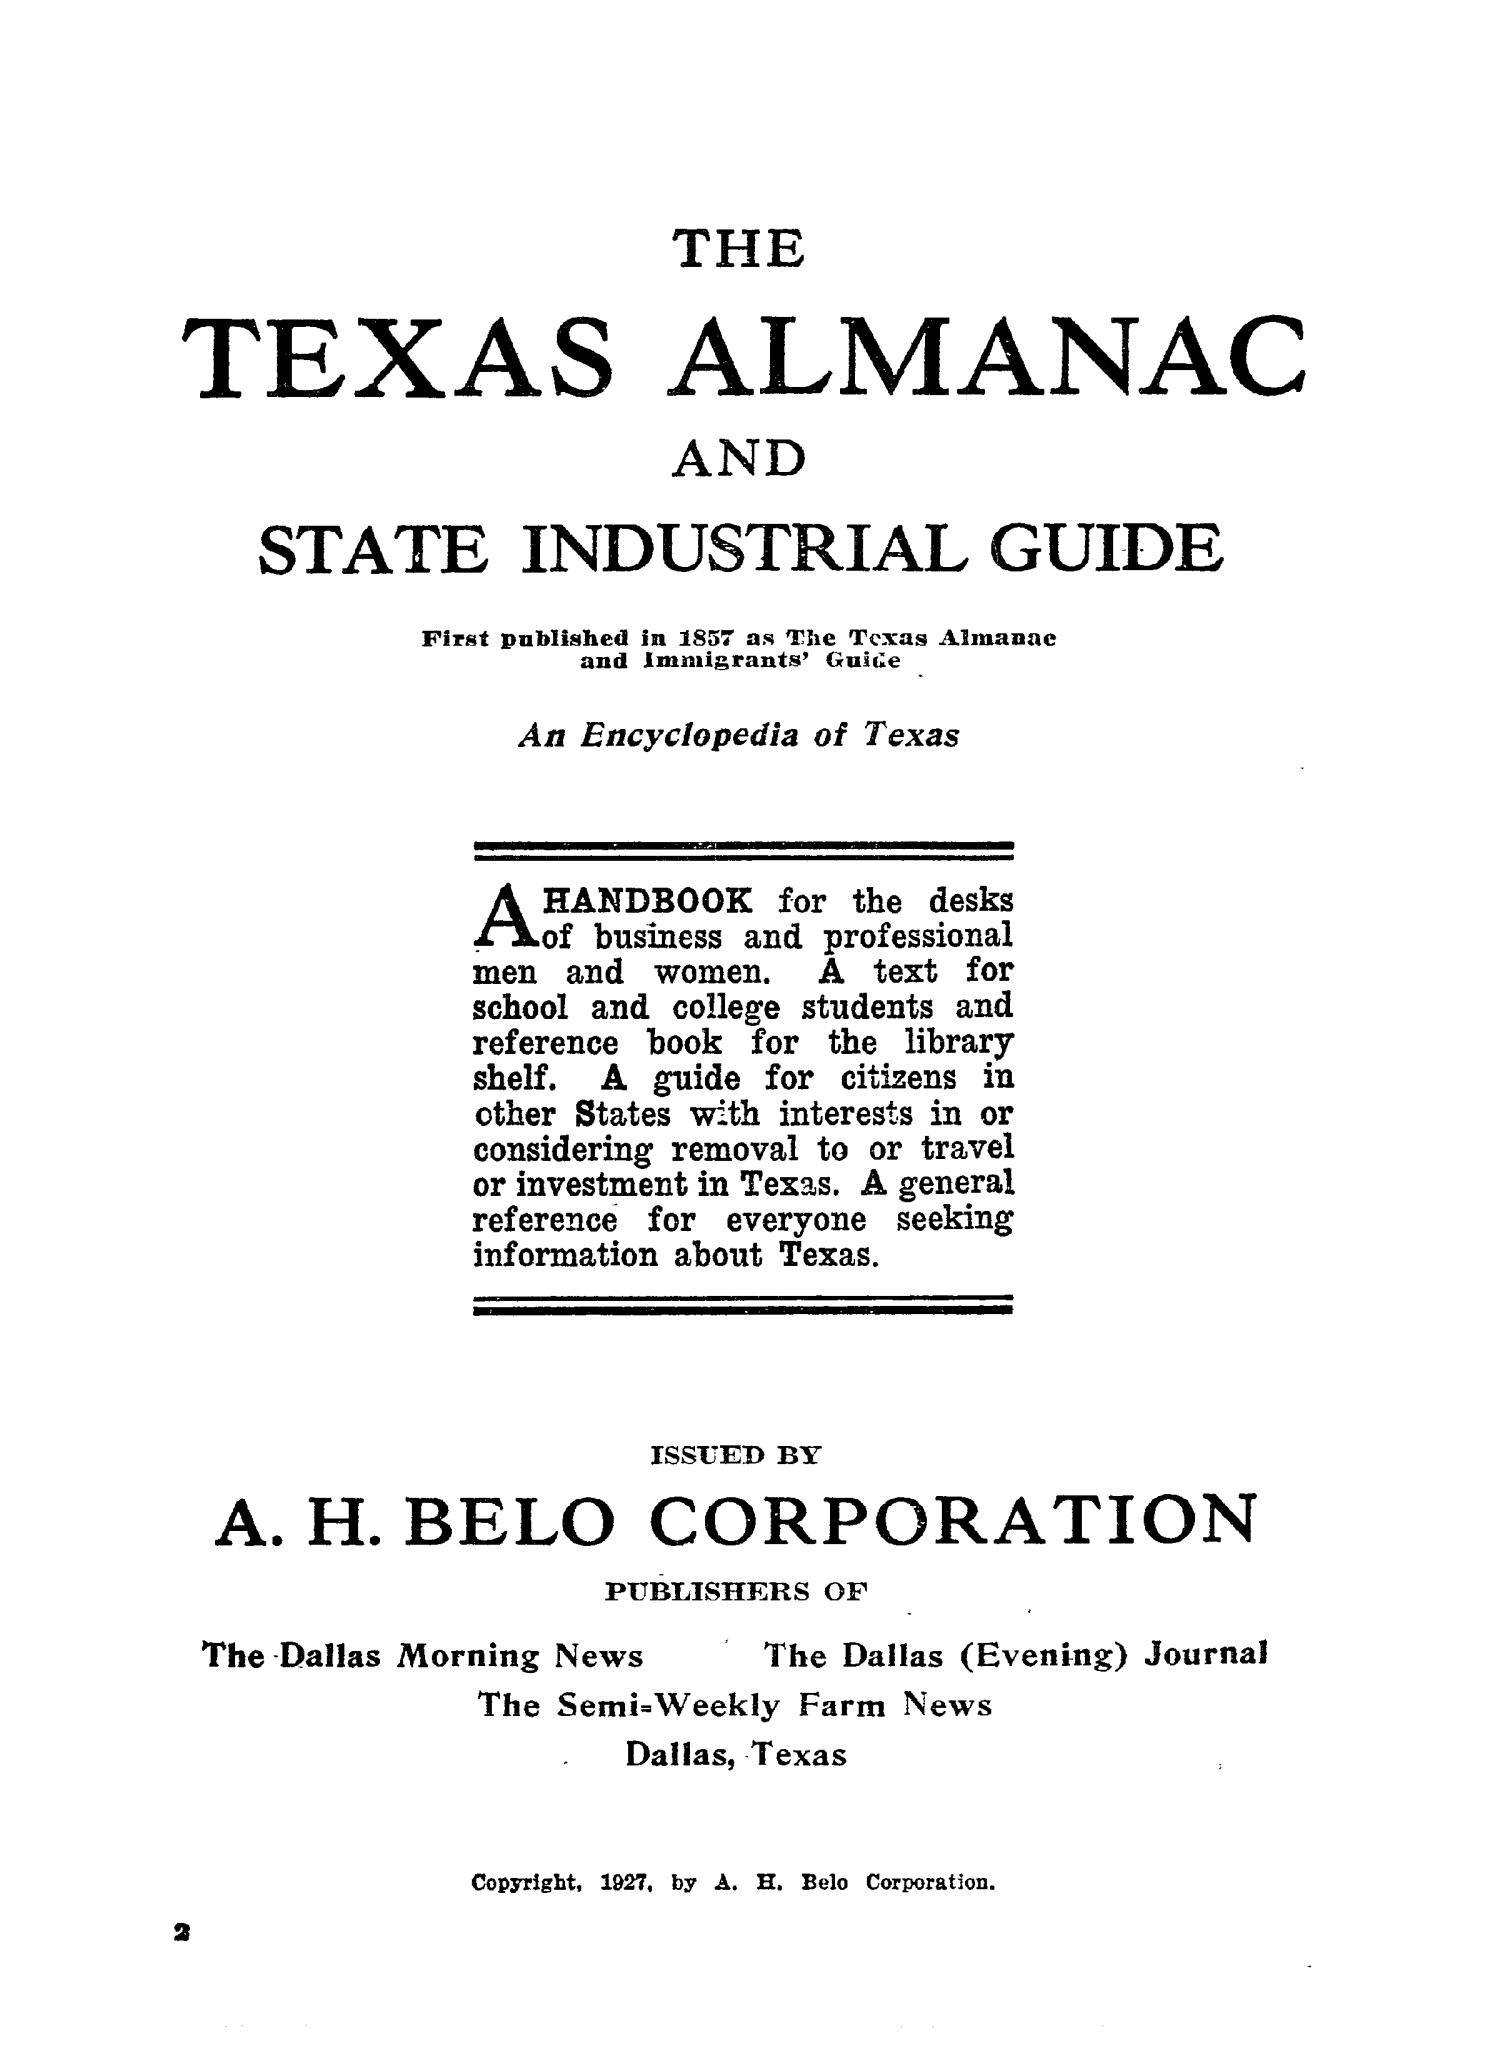 1927 The Texas Almanac and State Industrial Guide
                                                
                                                    33
                                                